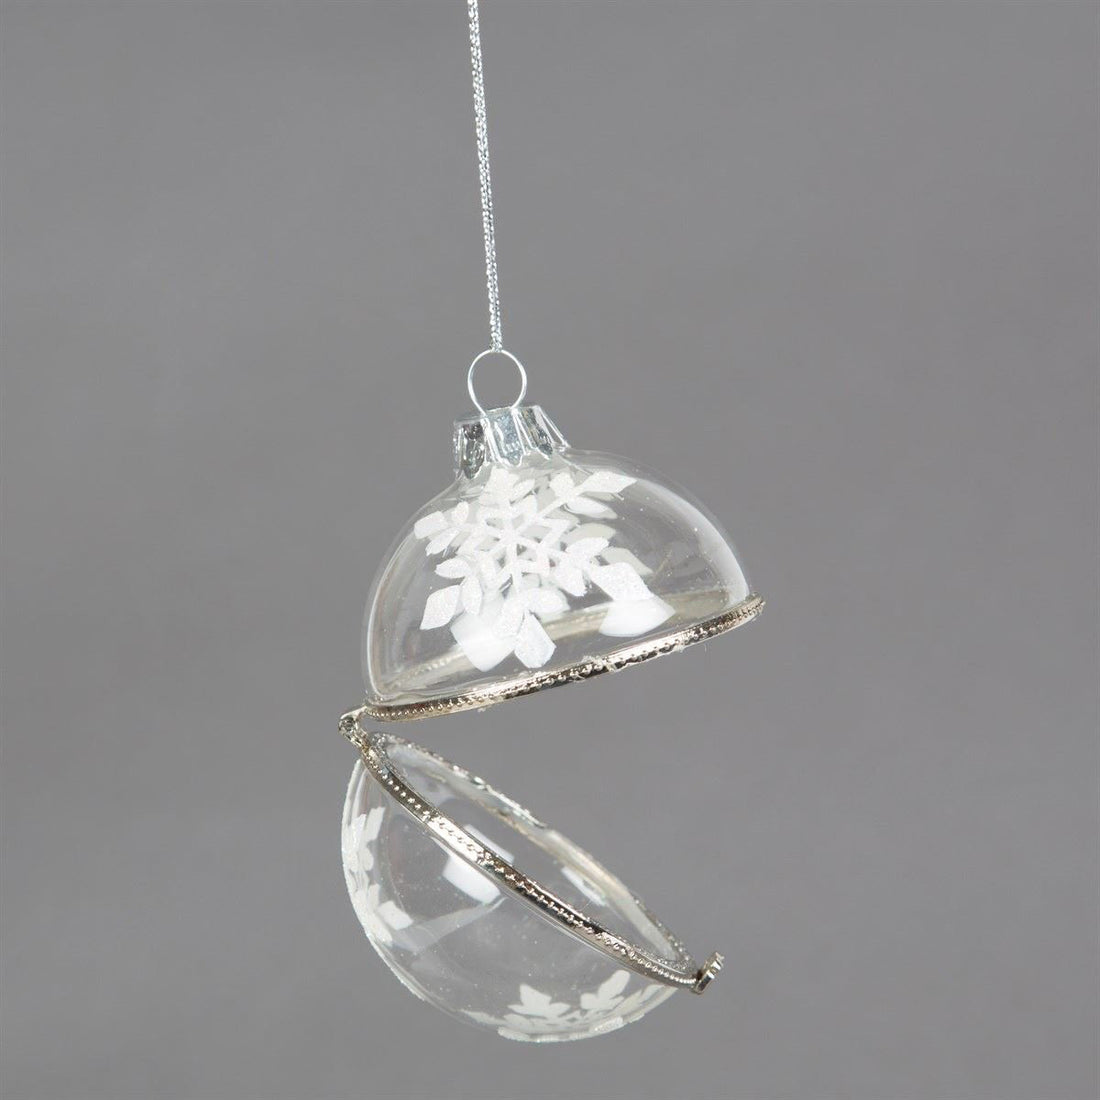 rjb-stone-imperial-snowflake-bauble-clear- (4)